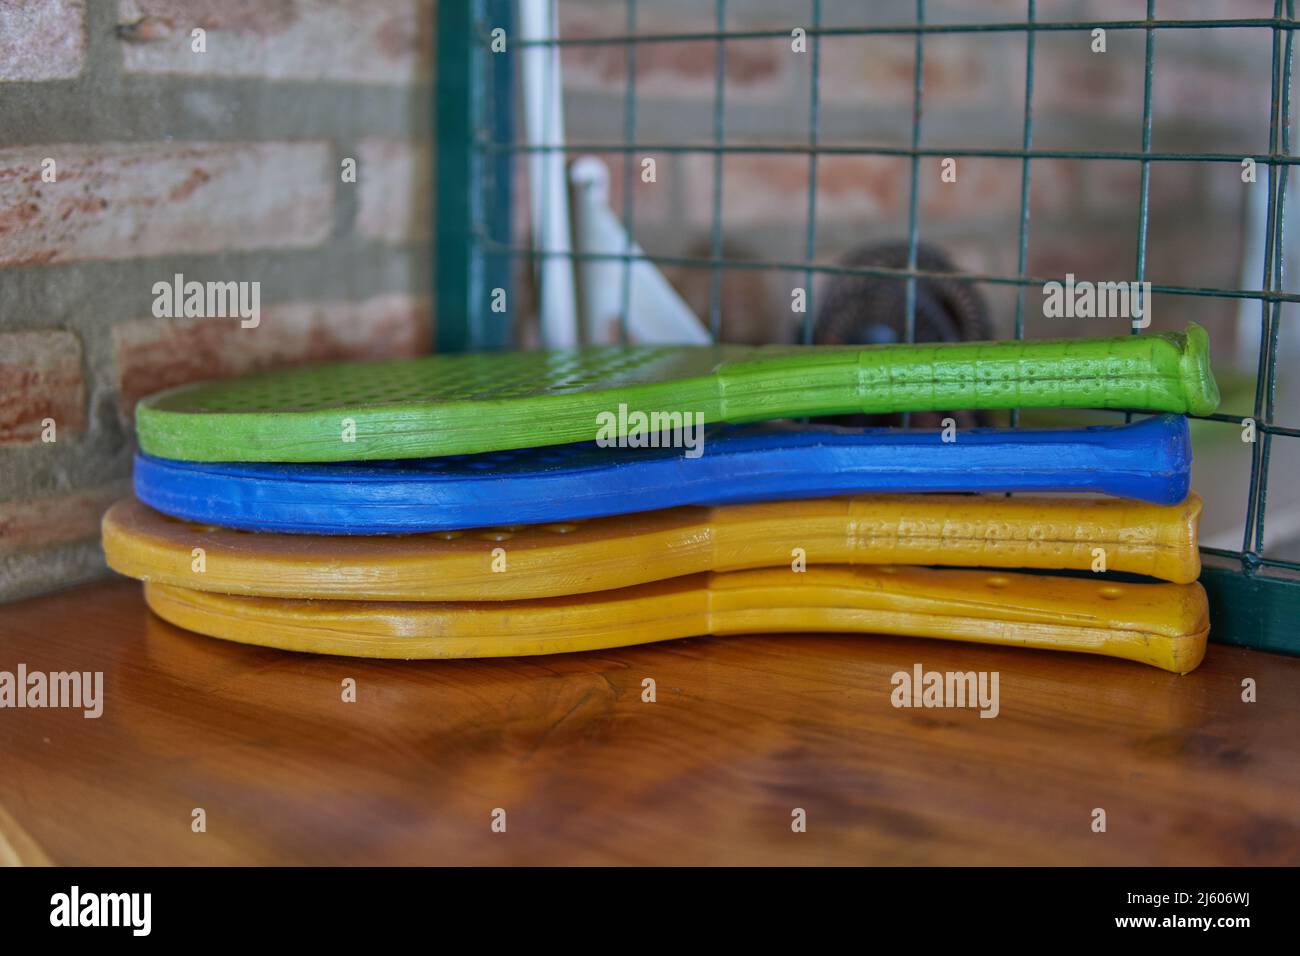 four plastic toy tennis racket on a wooden table. Stock Photo